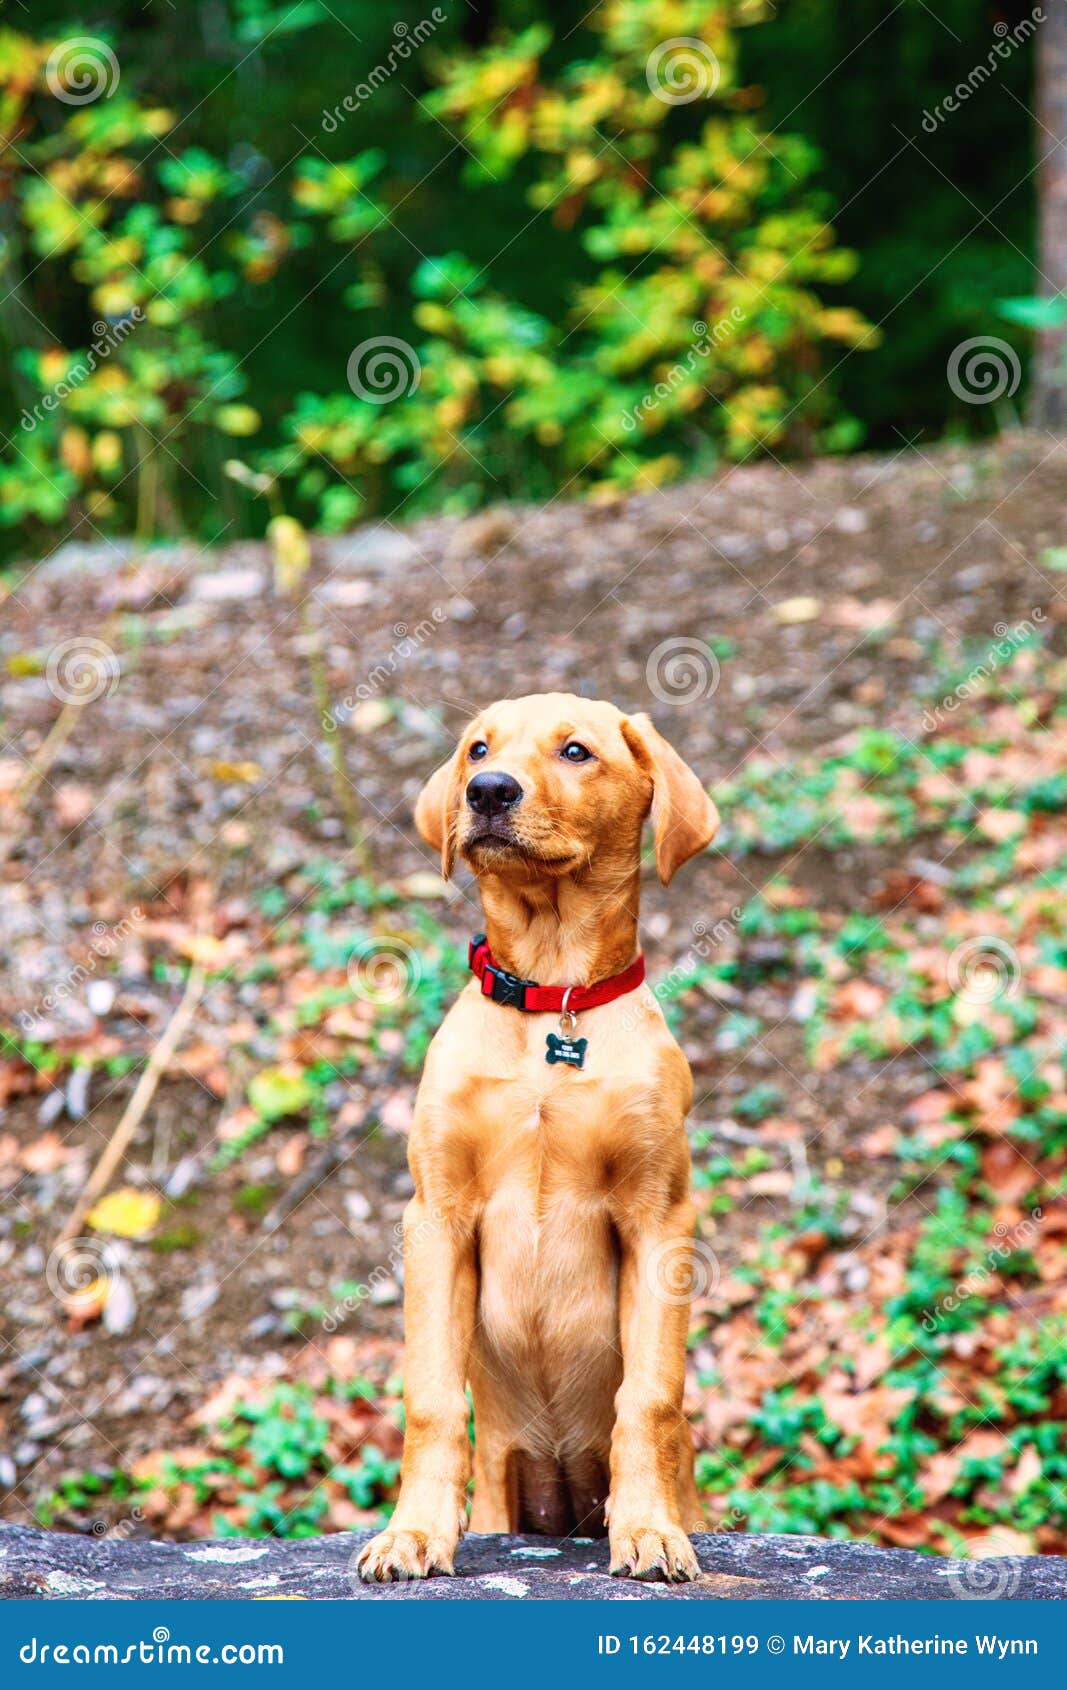 Red Labrador Puppy Standing On Rocks Stock Image - Image ...